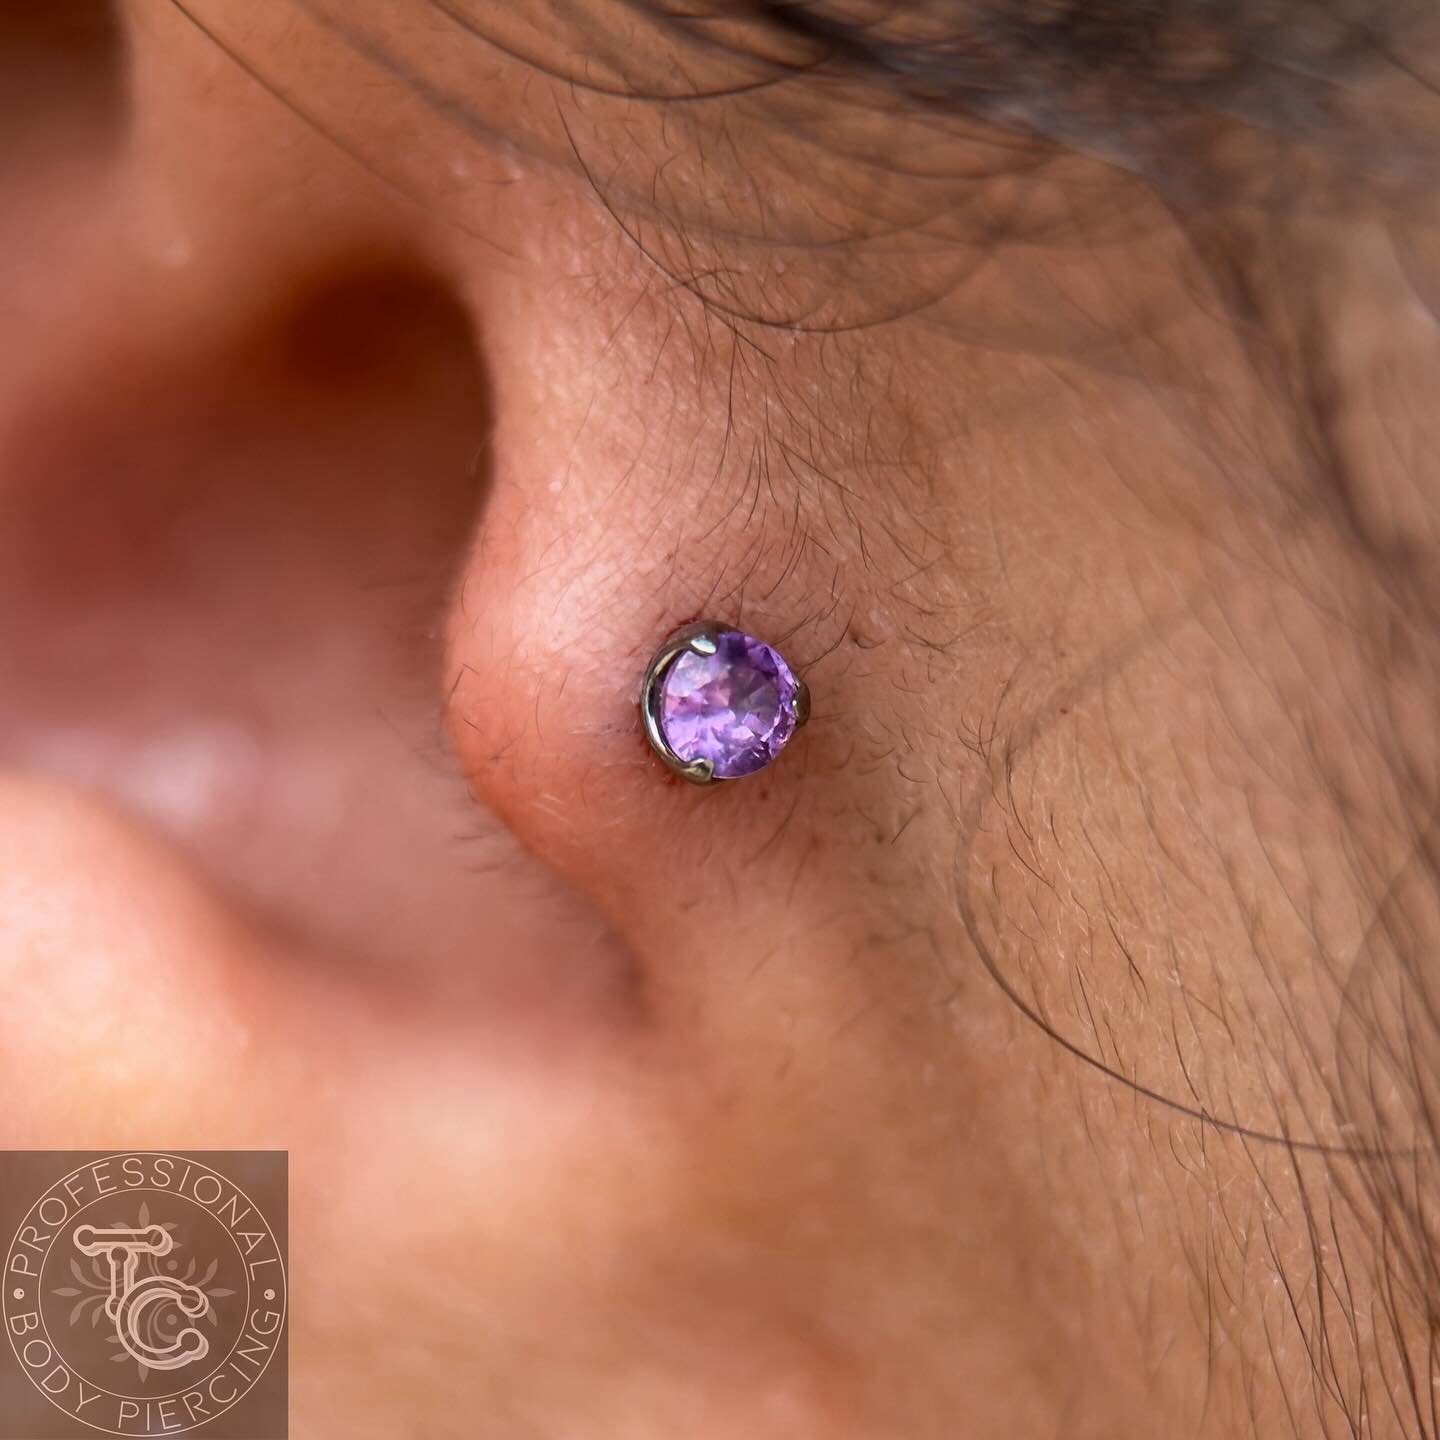 Fresh tragus piercing from today 💜

✨ 16g 11/32&rdquo; implant grade titanium labret post and 3mm amethyst CZ prong end from @junipurrjewelry 
✨ Pierced with @stilettopiercingsupplies and my trusty &ldquo;felix&rdquo; tool from @aesthetic_ambition_s